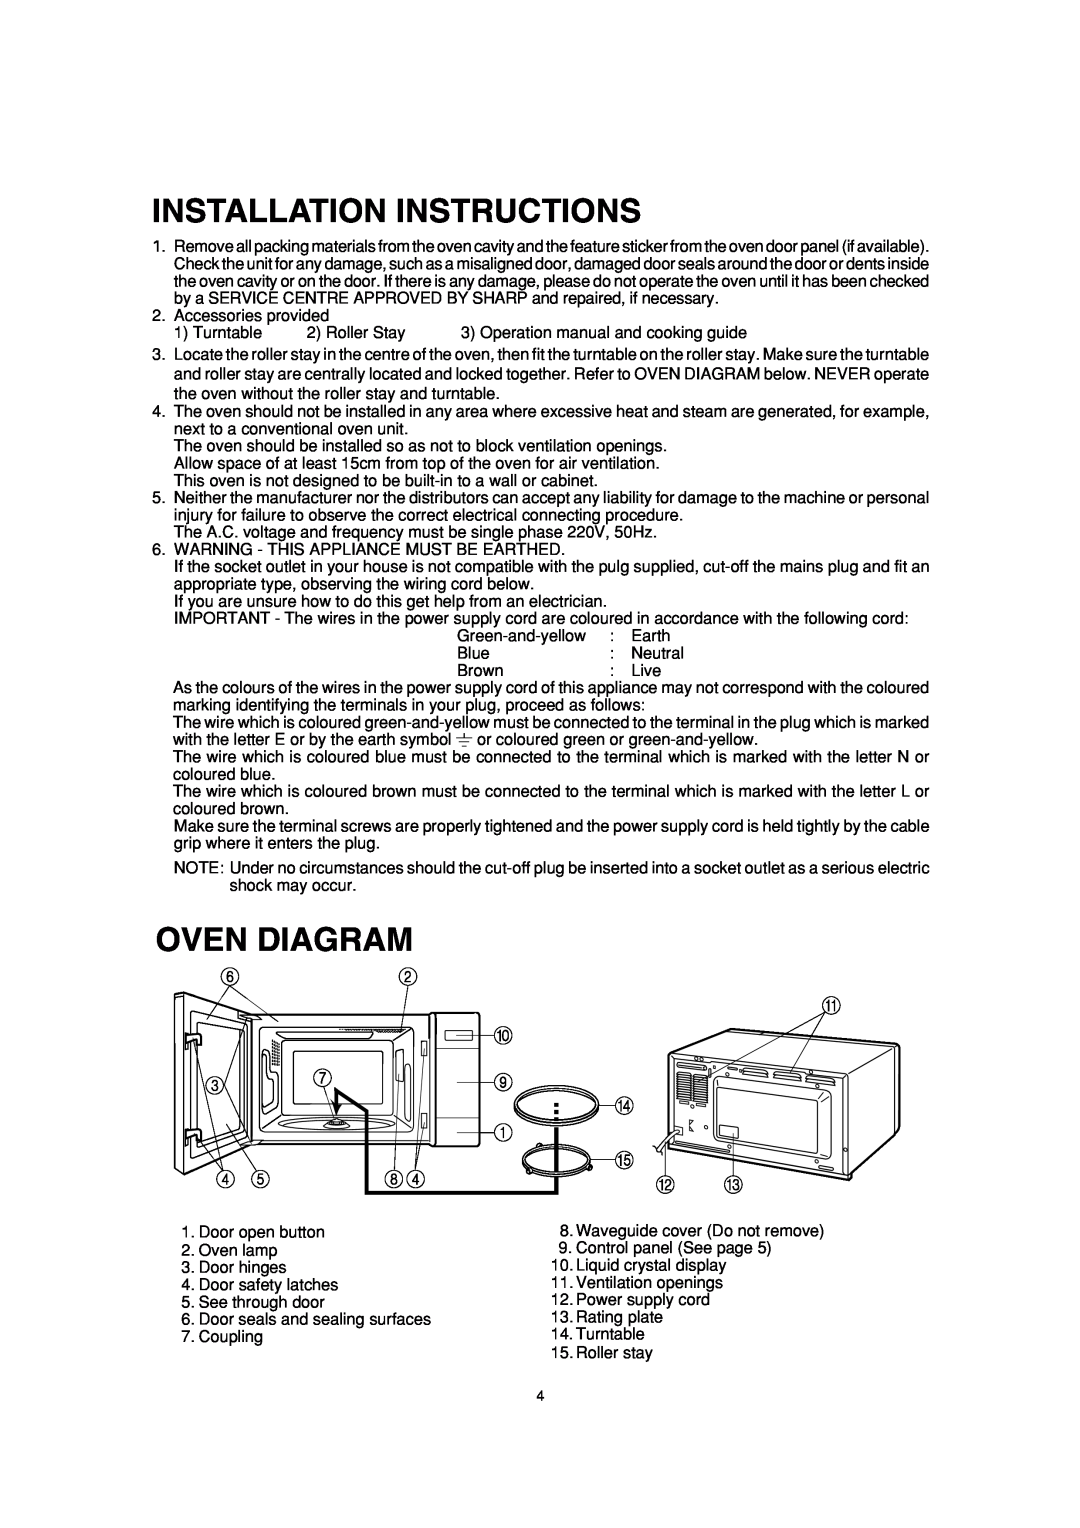 Sharp R-390H(S) operation manual Installation Instructions, Oven Diagram 